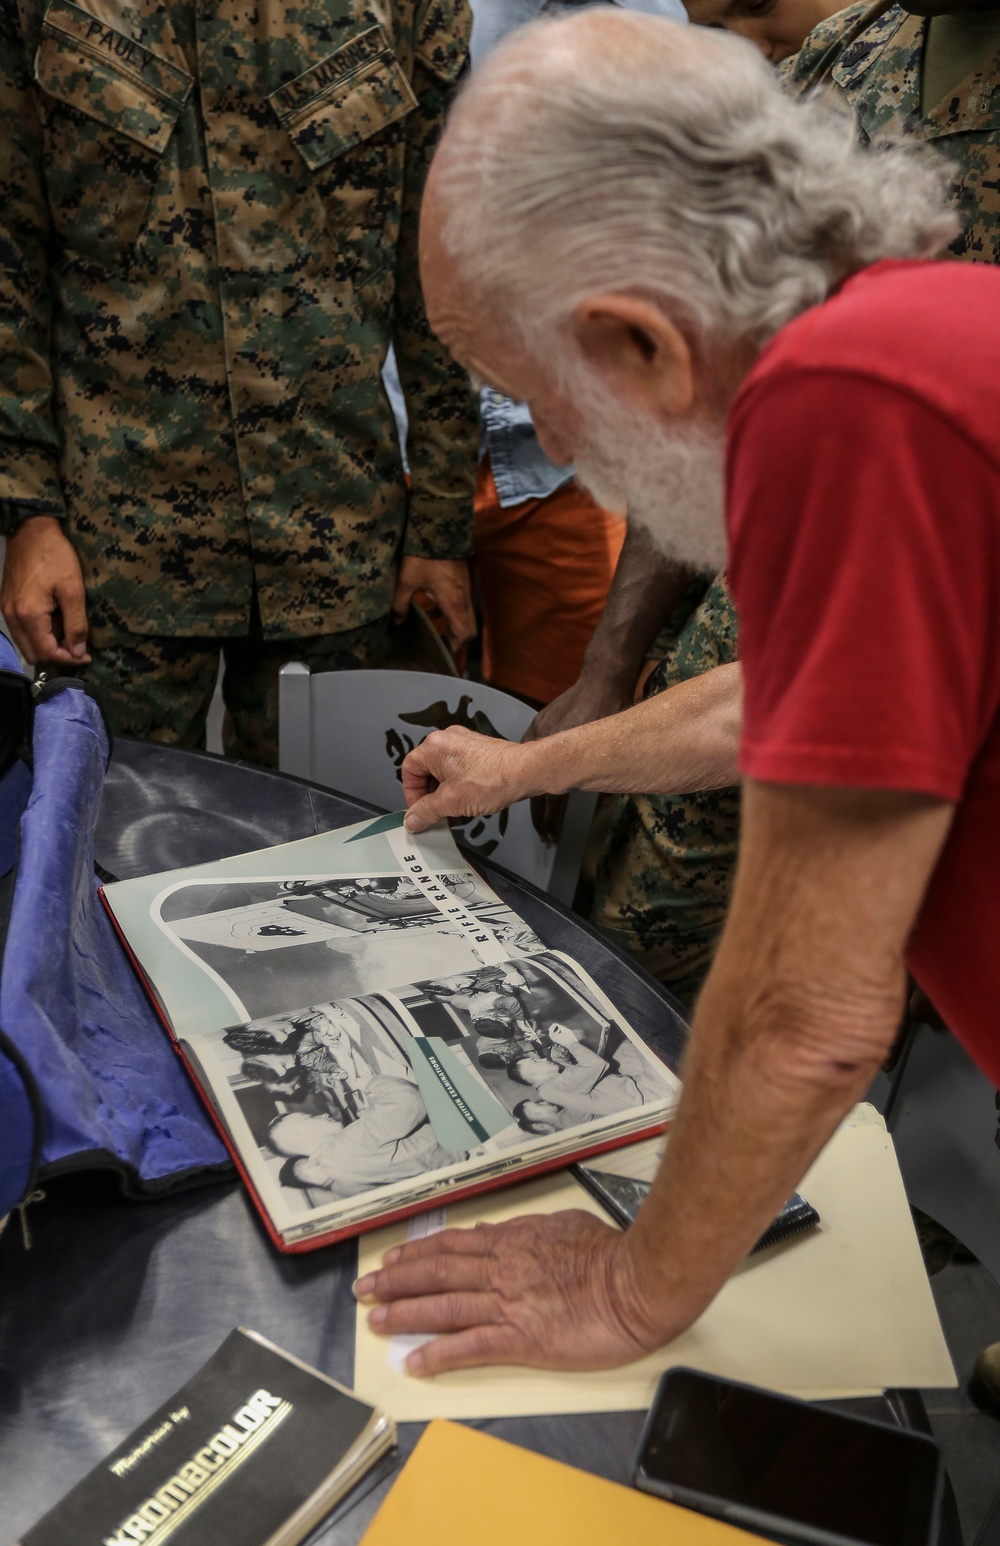 Class of ‘55: 2nd Recruit Training Battalion Marines Reunite after 64 Years